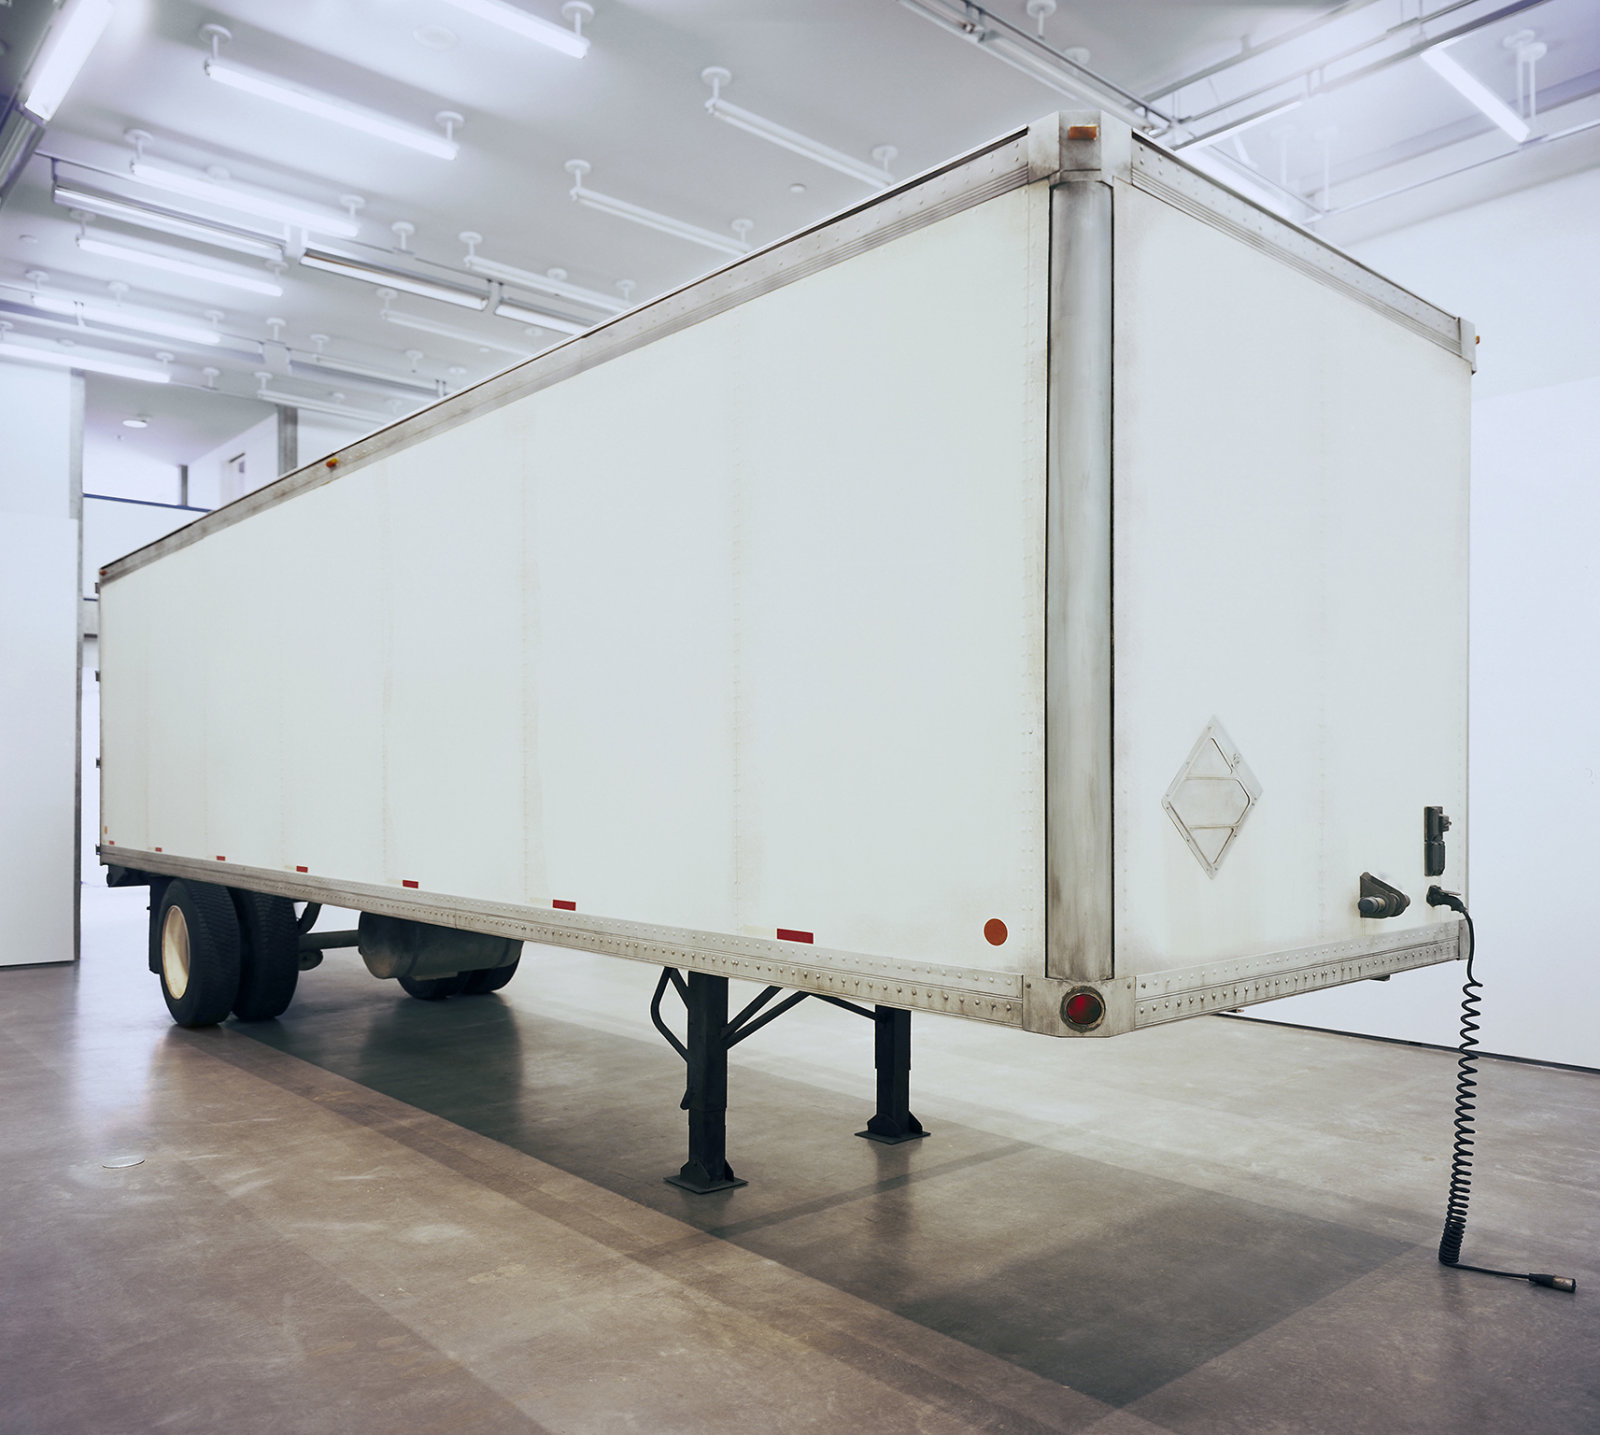 Geoffrey Farmer, Trailer, 2002, steel, fiberboard, mixed media, 134 x 87 x 354 in. (340 x 220 x 900 cm). Installation view, The Blacking Factory, Contemporary Art Gallery, Vancouver, 2002